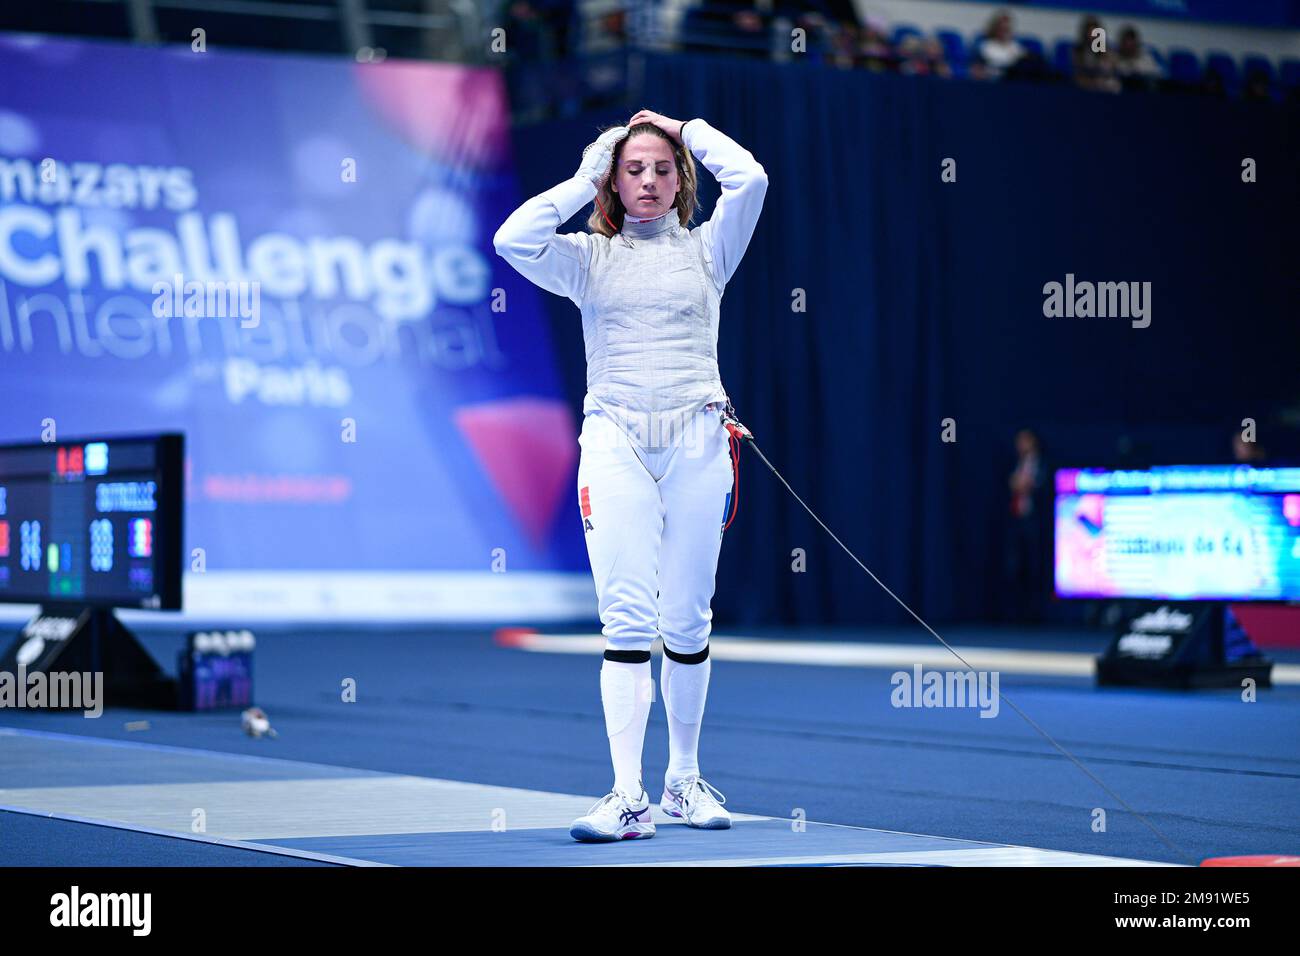 BUTRUILLE Solene (FRA) during the Mazars Challenge International of Fencing (foil) at Stade Pierre de Coubertin on January 14, 2023 in Paris, France. Stock Photo